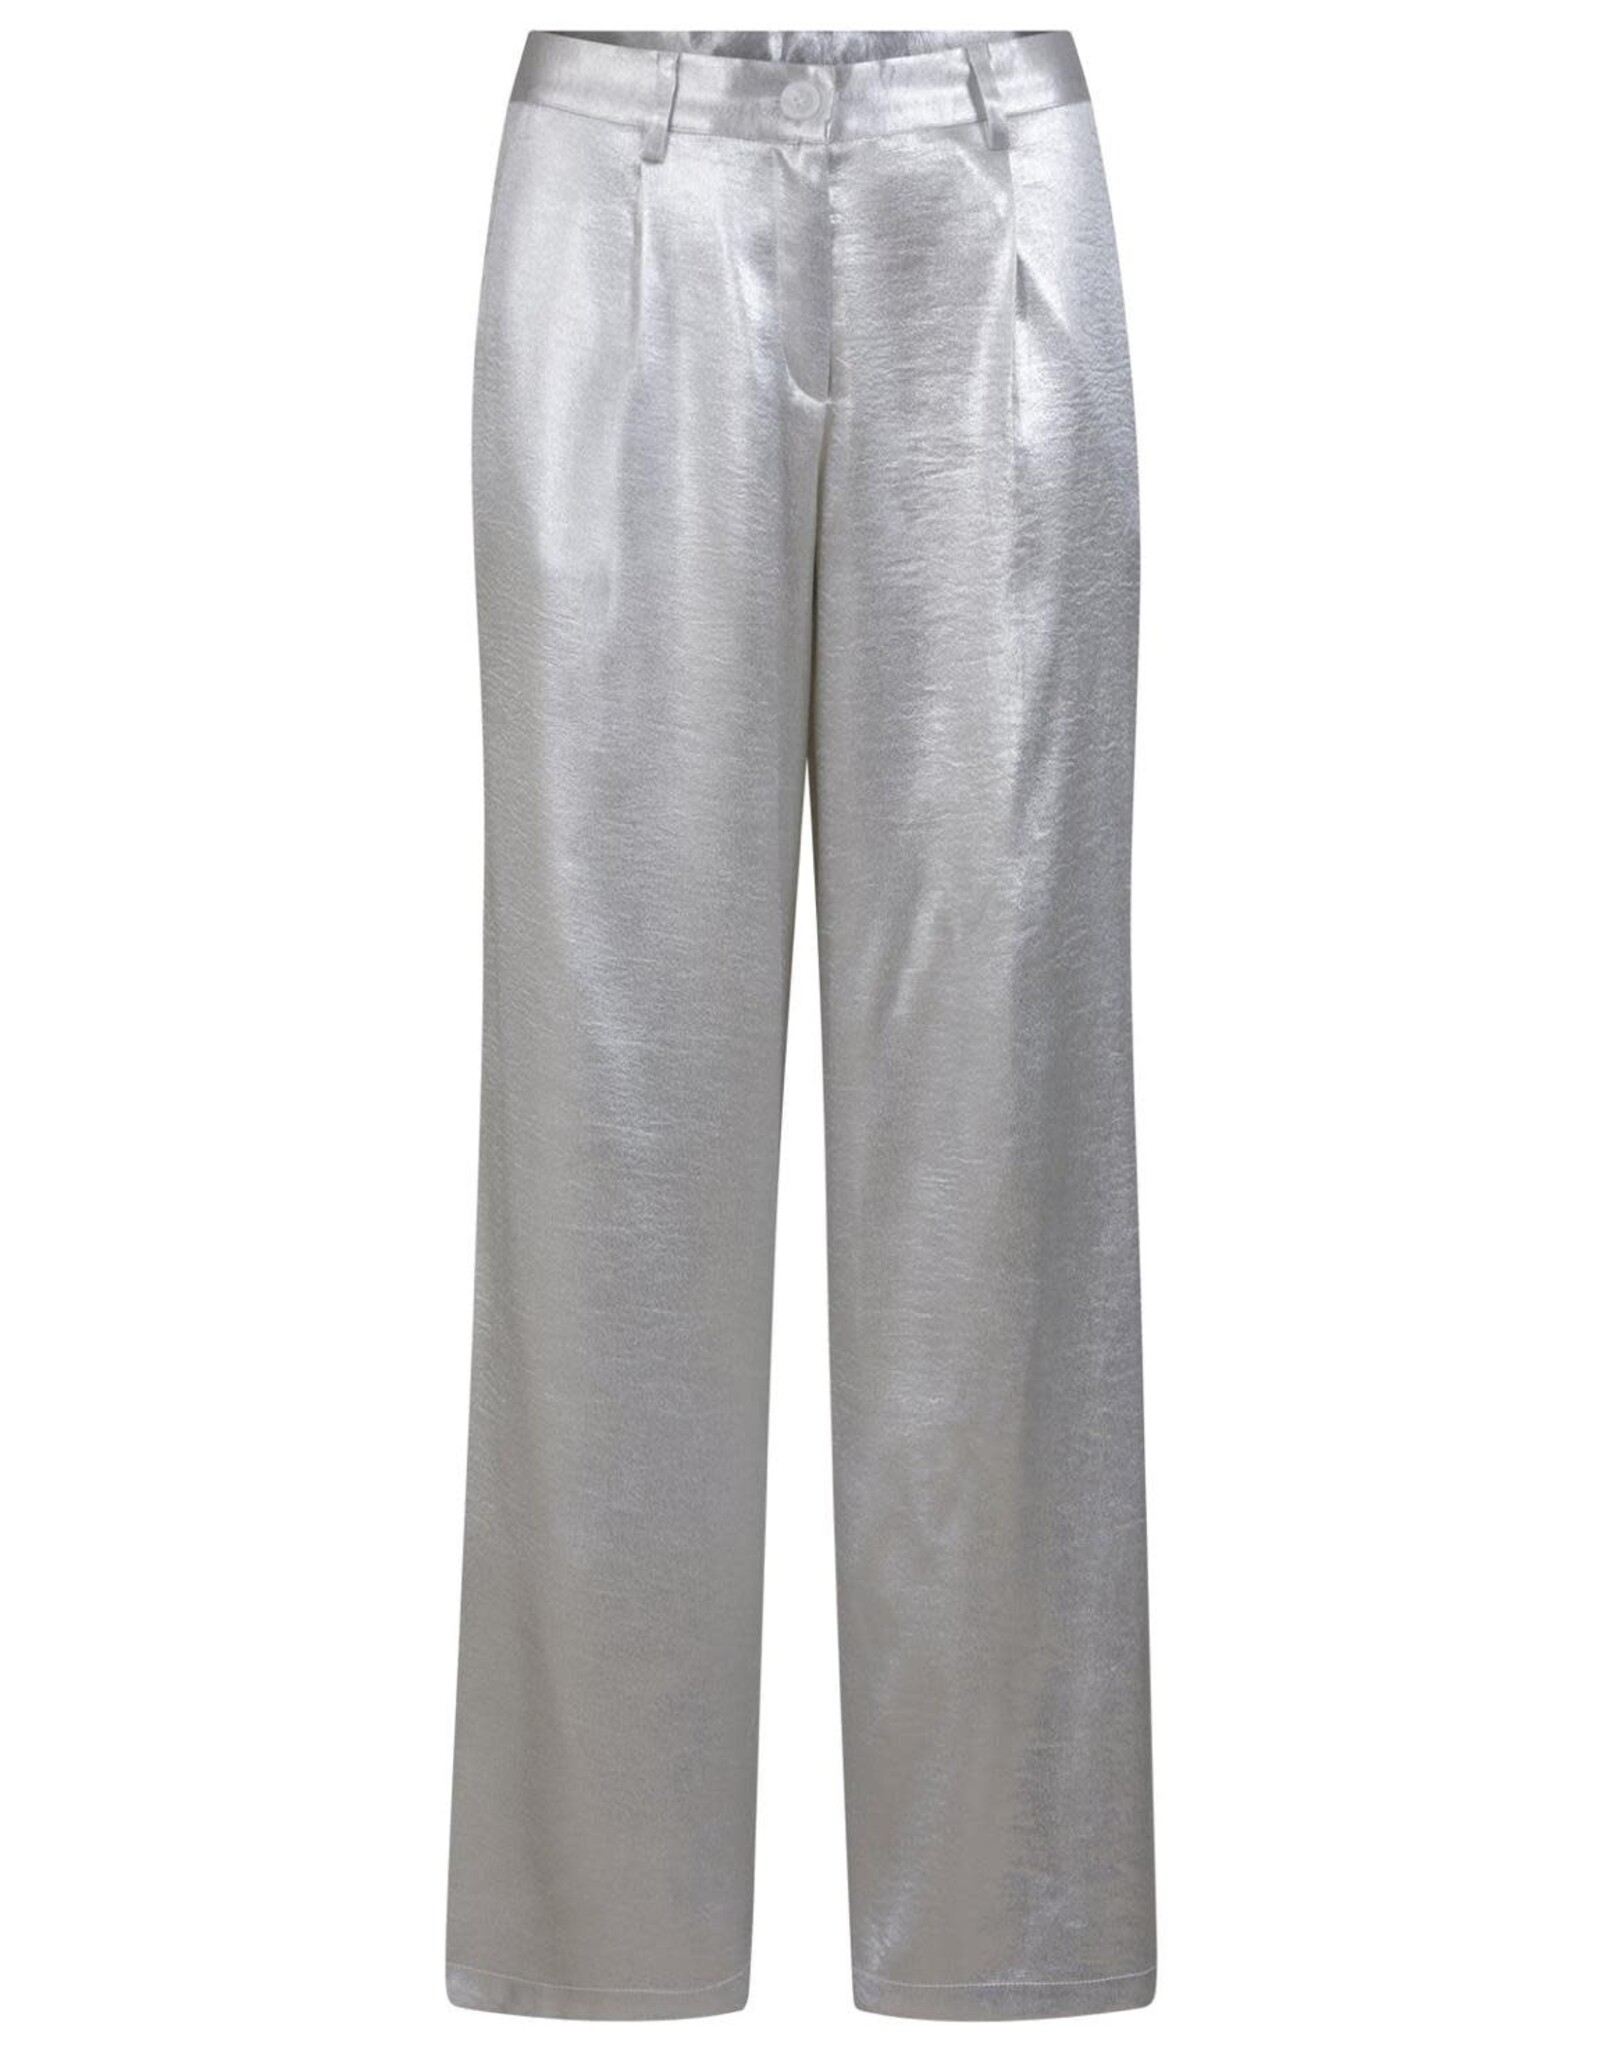 COSTER COPENHAGEN PETRA FIT SILVER TROUSERS 242-3256 BY COSTER